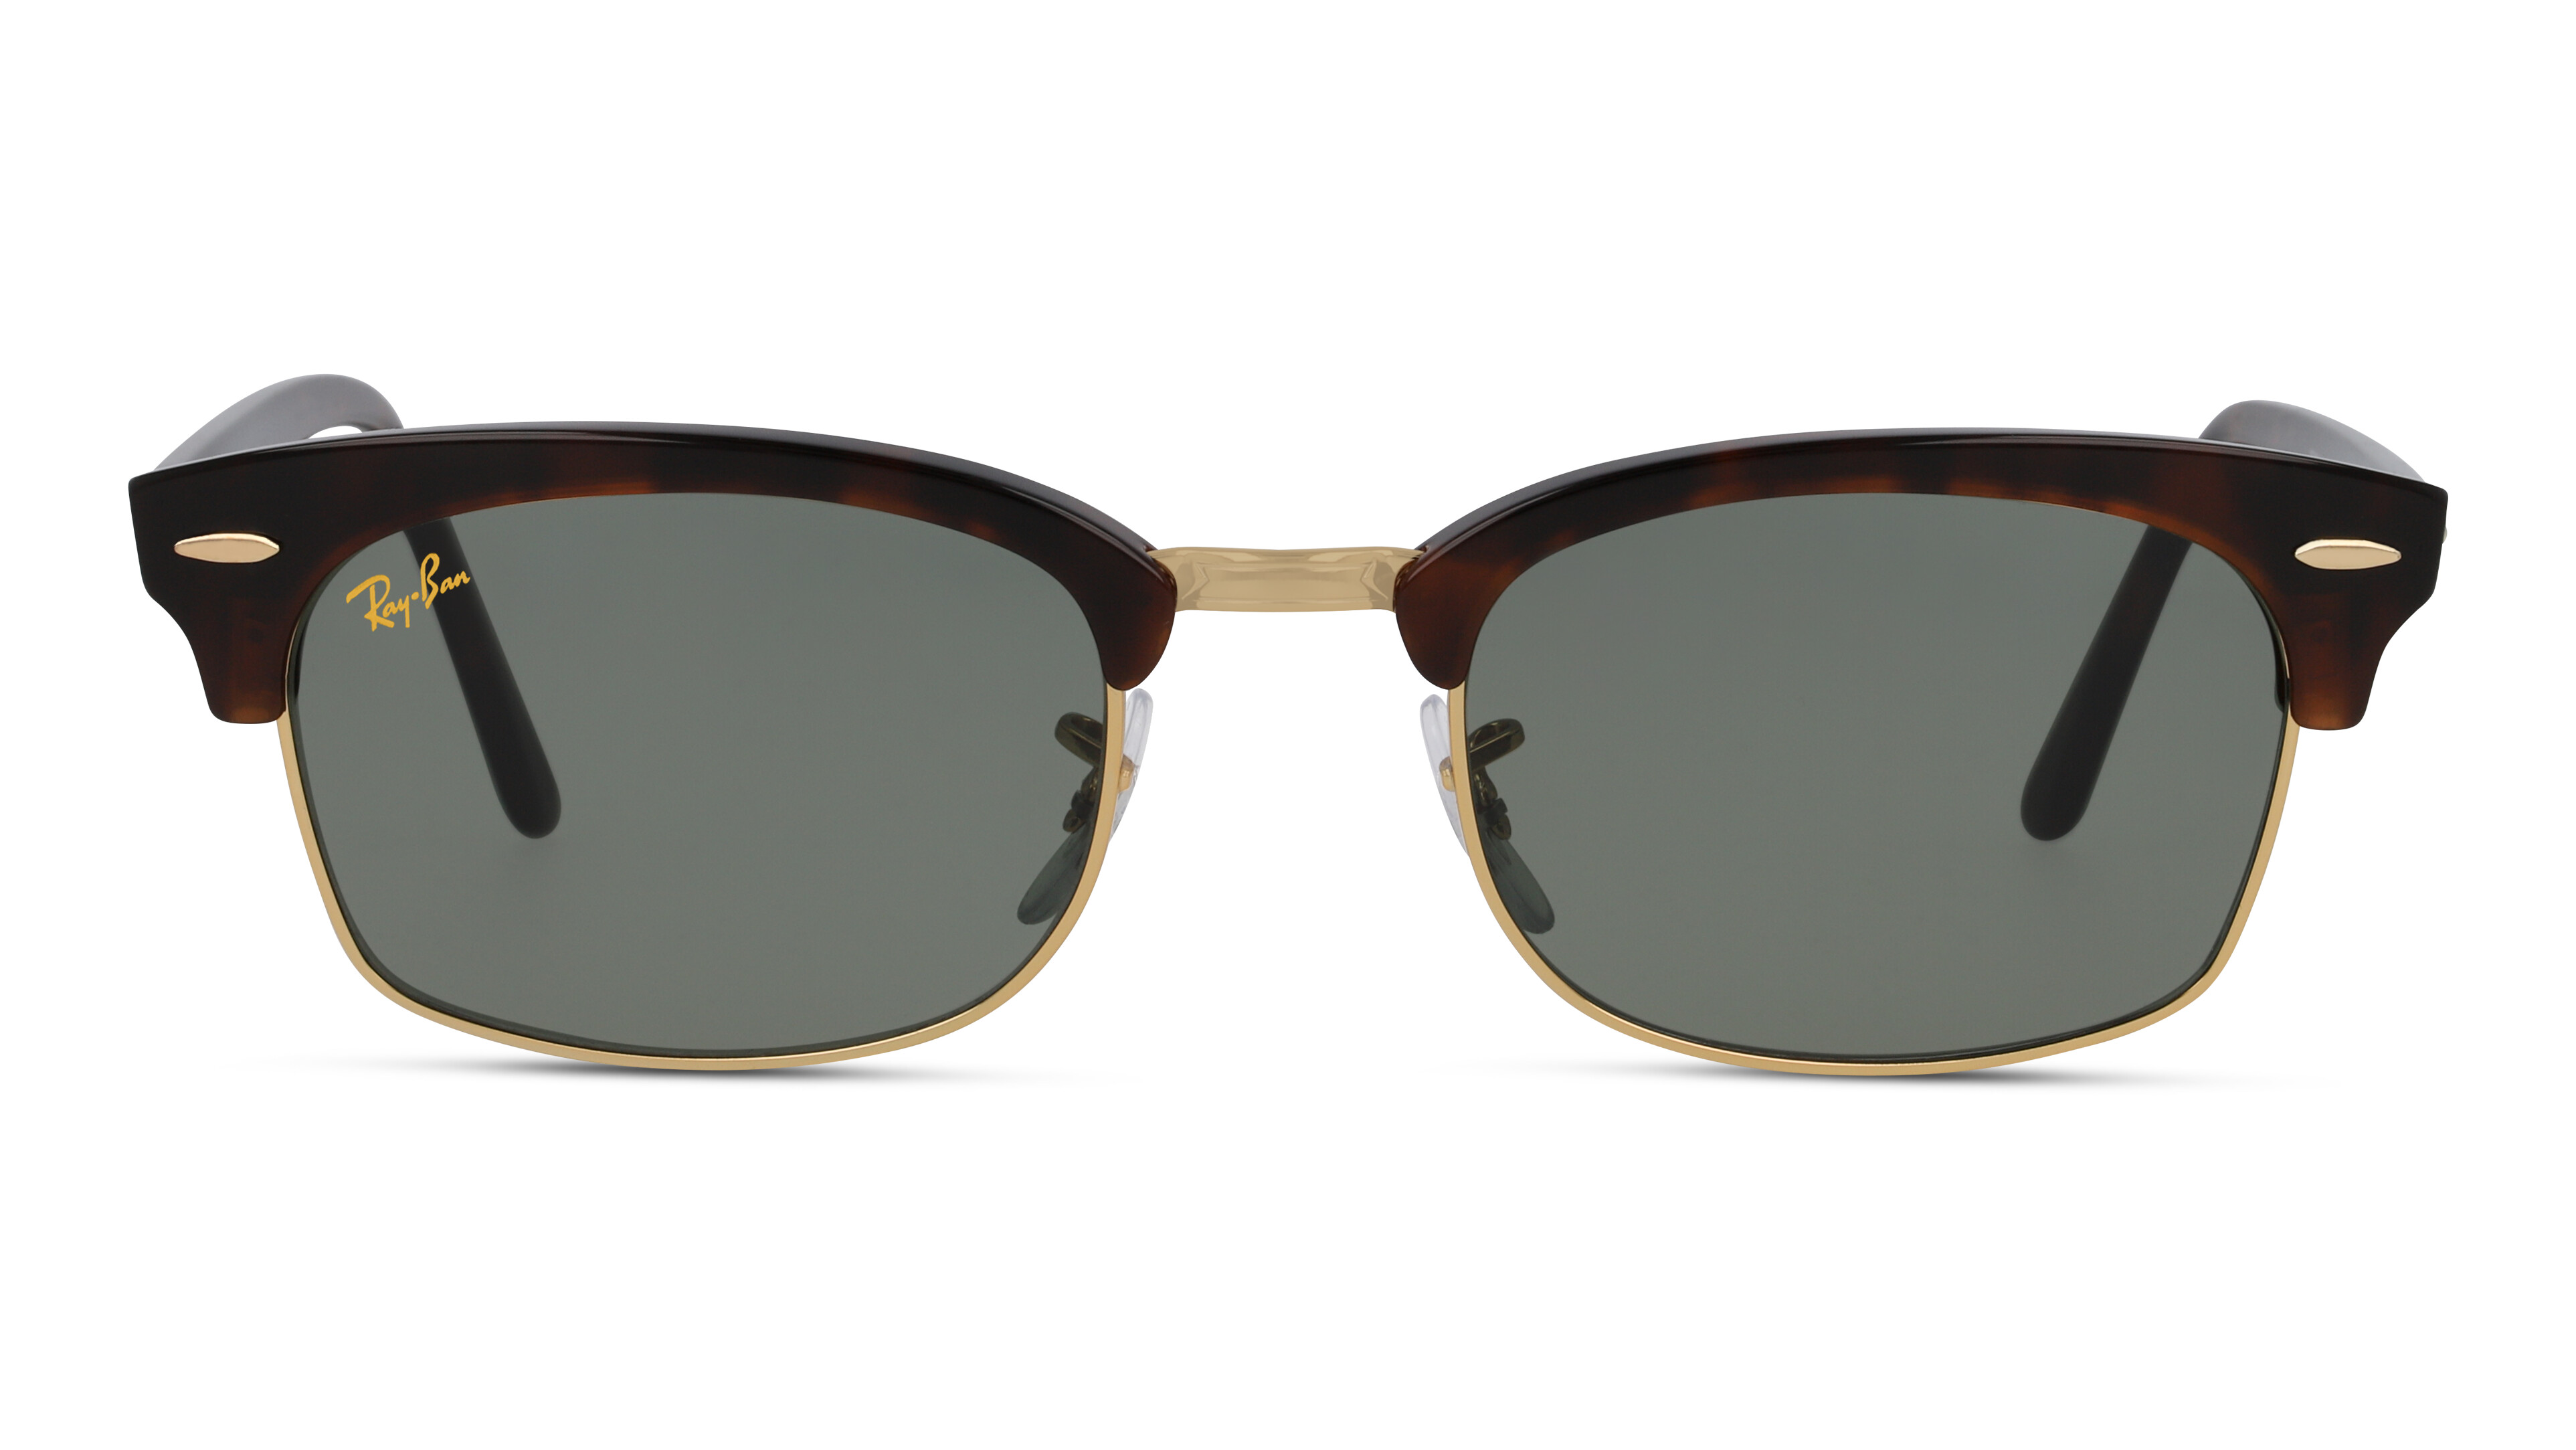 [products.image.front] Ray-Ban CLUBMASTER SQUARE 0RB3916 130431 Sonnenbrille